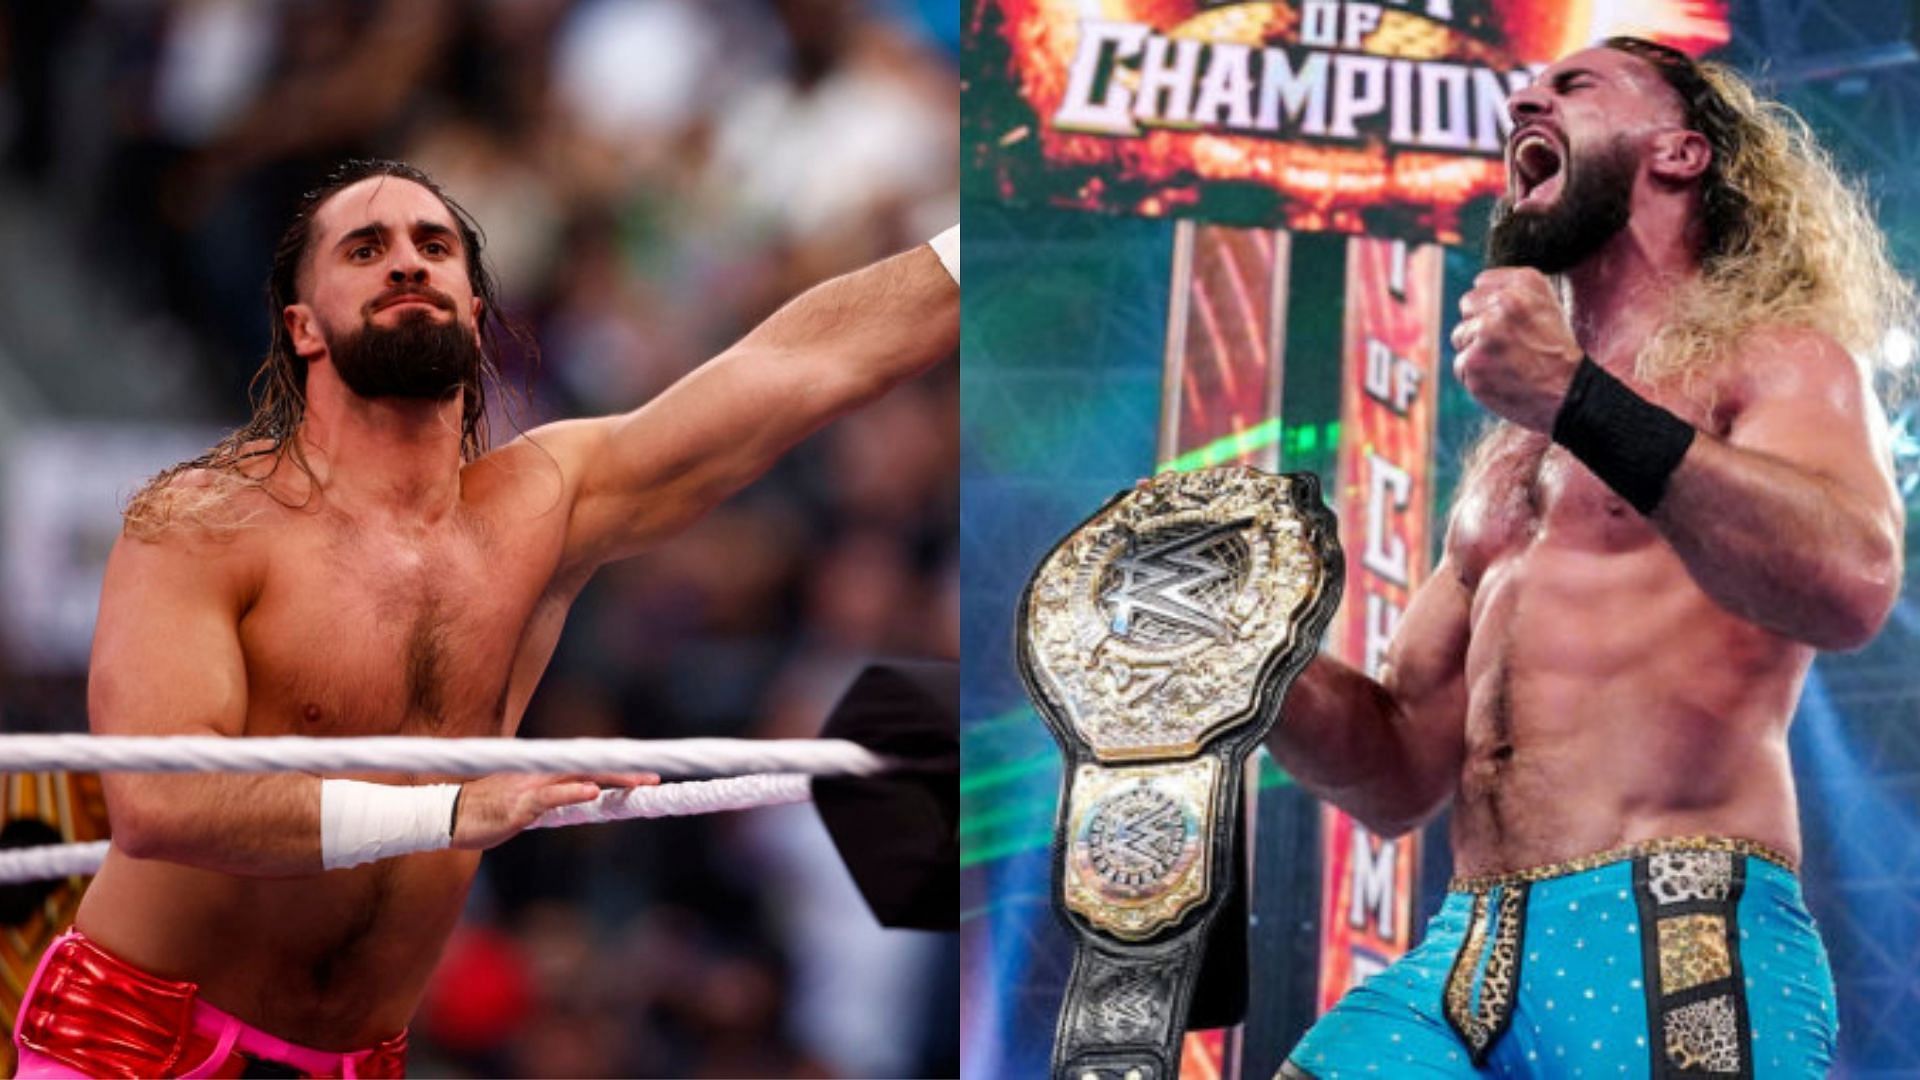 Seth Rollins is the new World Heavyweight Champion